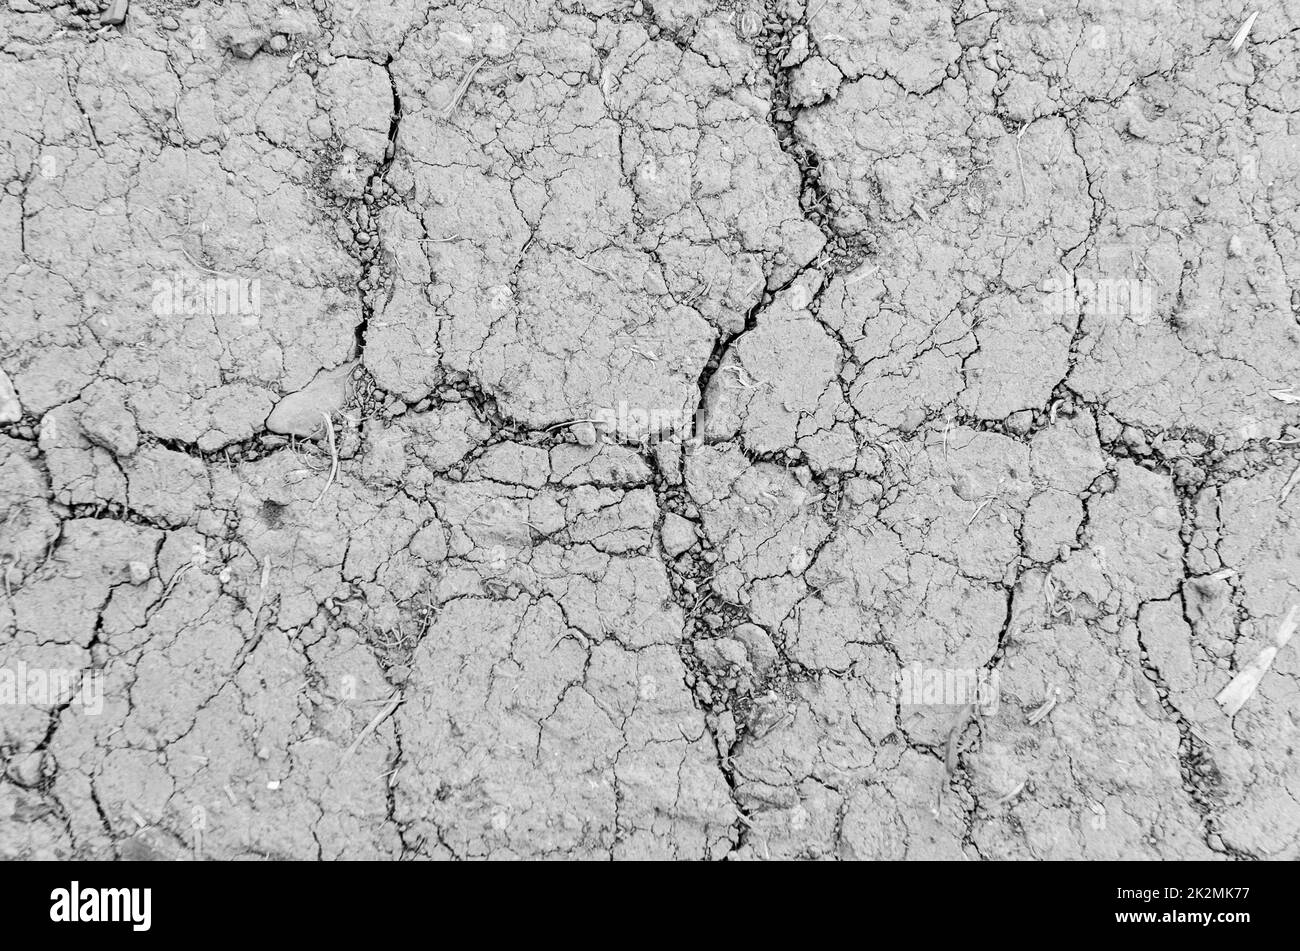 Dry soil, cracked muddy ground, dried mud with cracks, flat lay view from directly above, natural abstract background or wallpaper Stock Photo